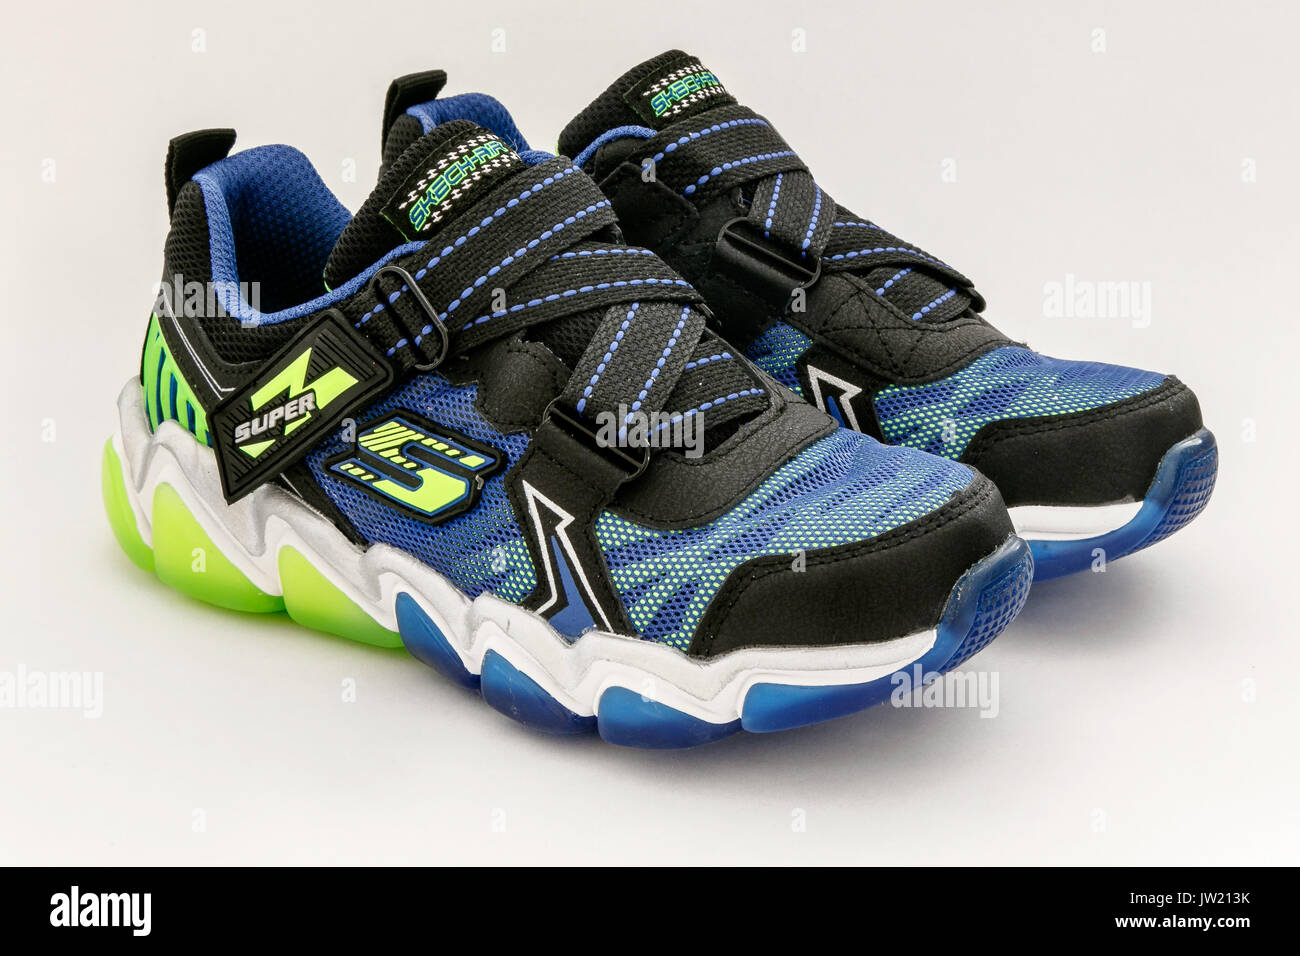 skechers shoes for kid india